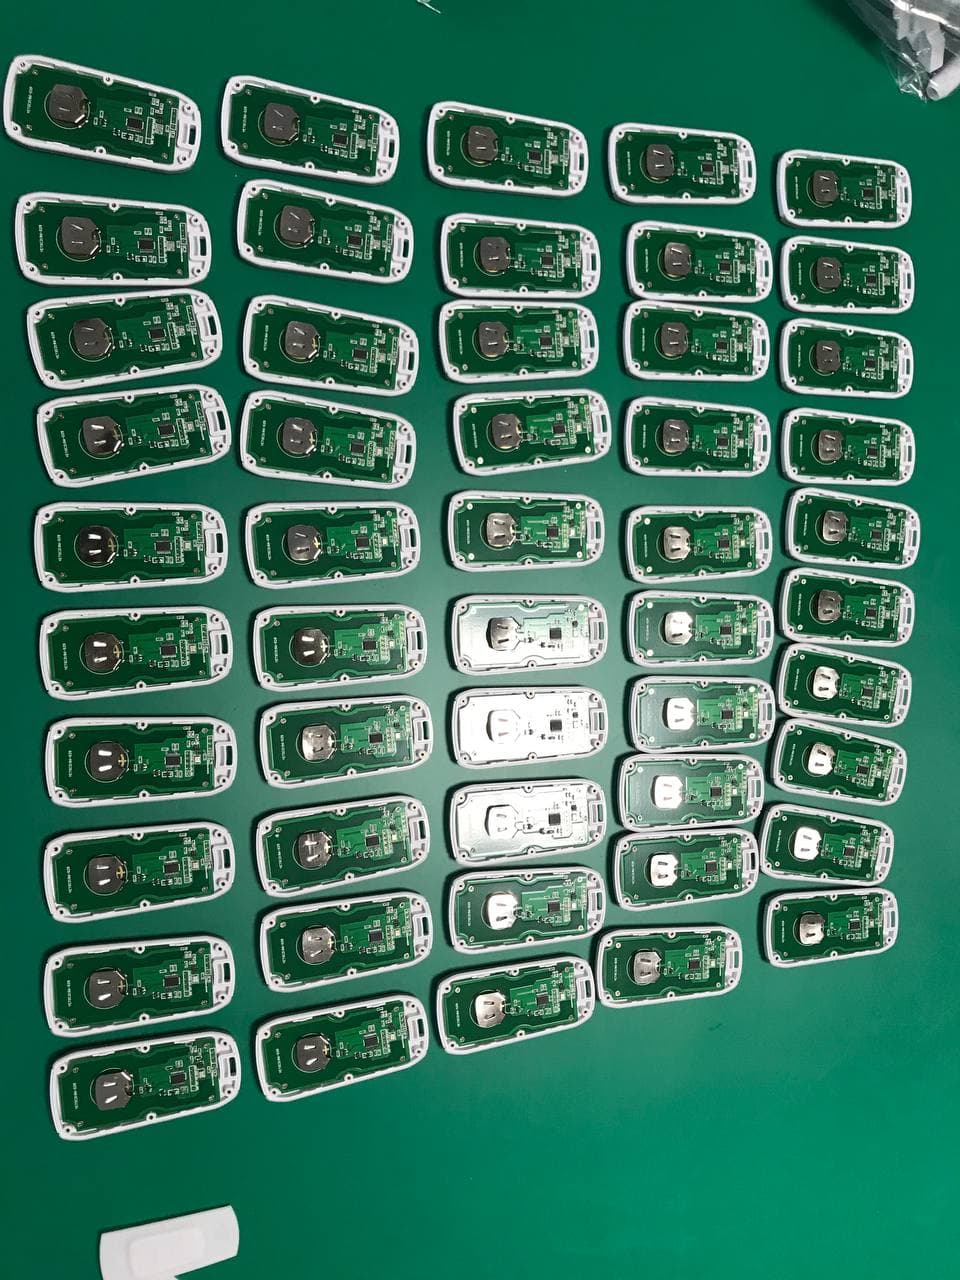 PCBs for the Pro remotes are ready, the remotes are assembled